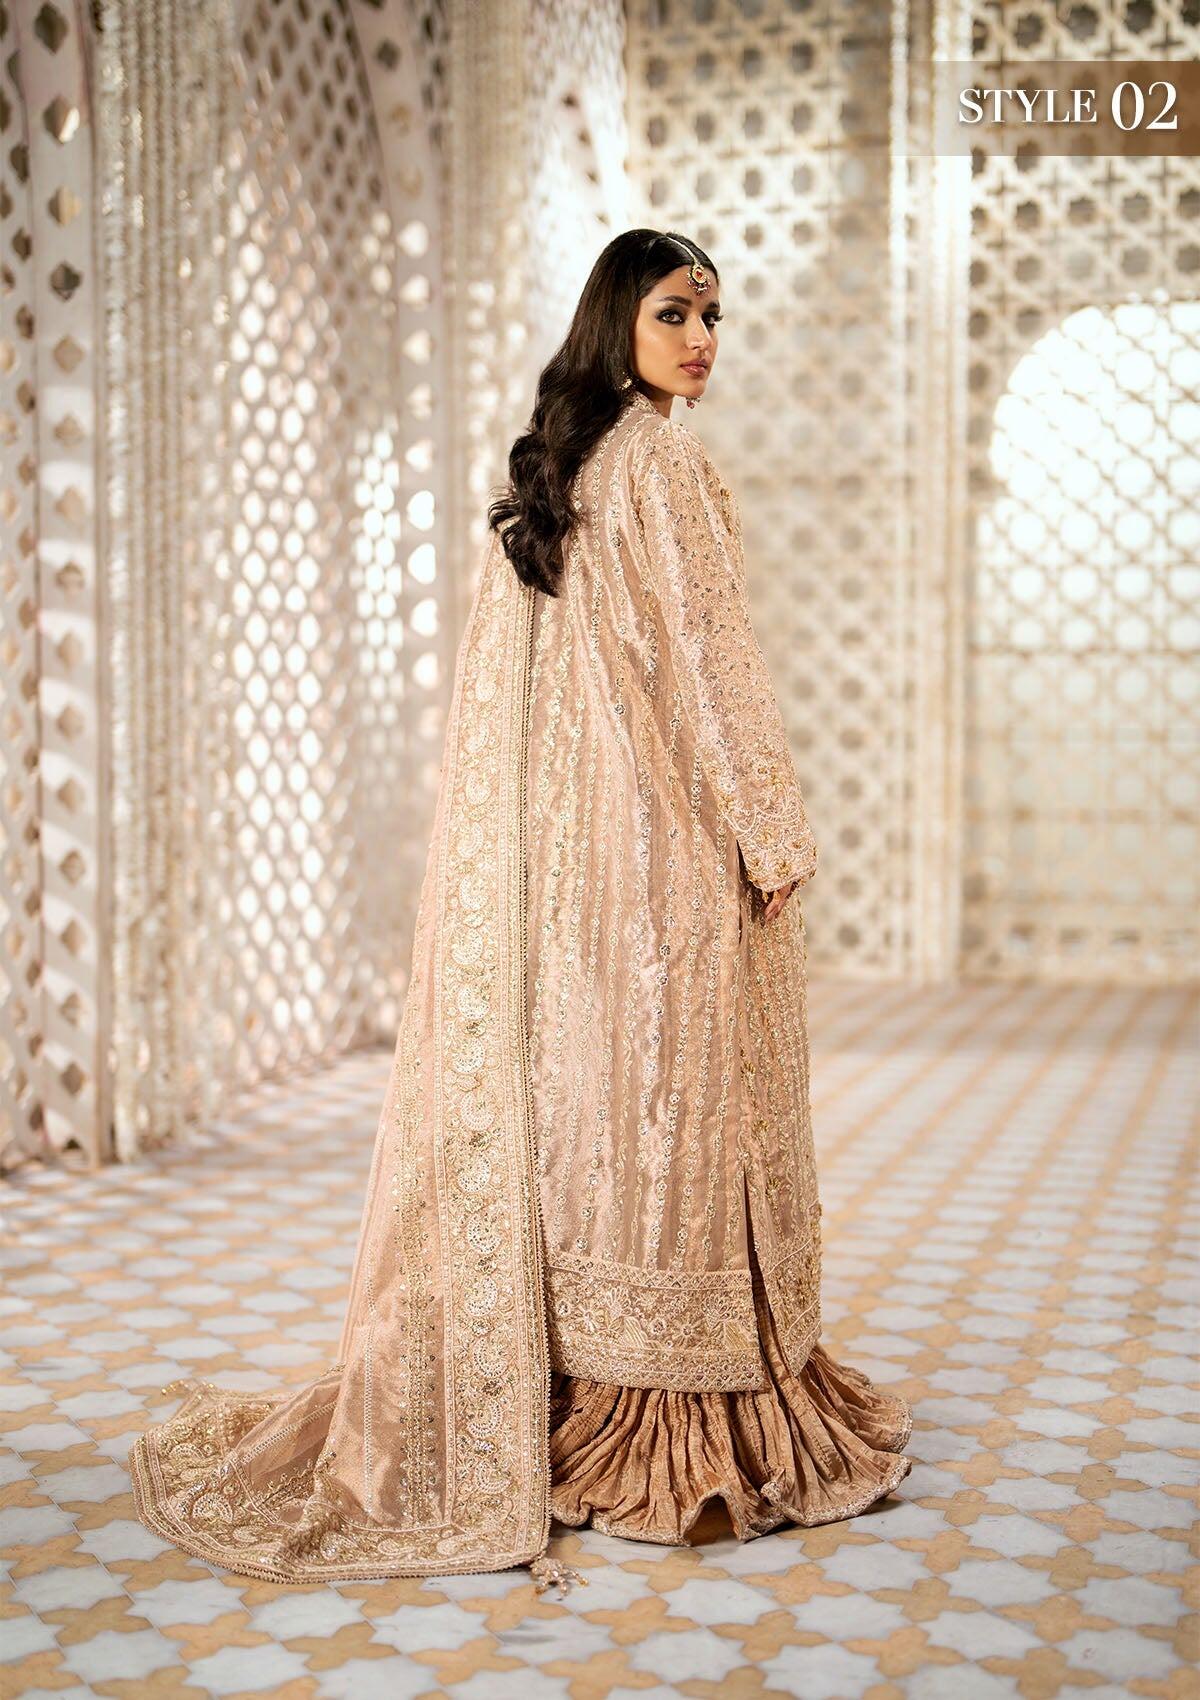 LOOK 06 AIK ATELIER EMBROIDERED LILAC CHIFFON SAREE LUXURY COLLECTION